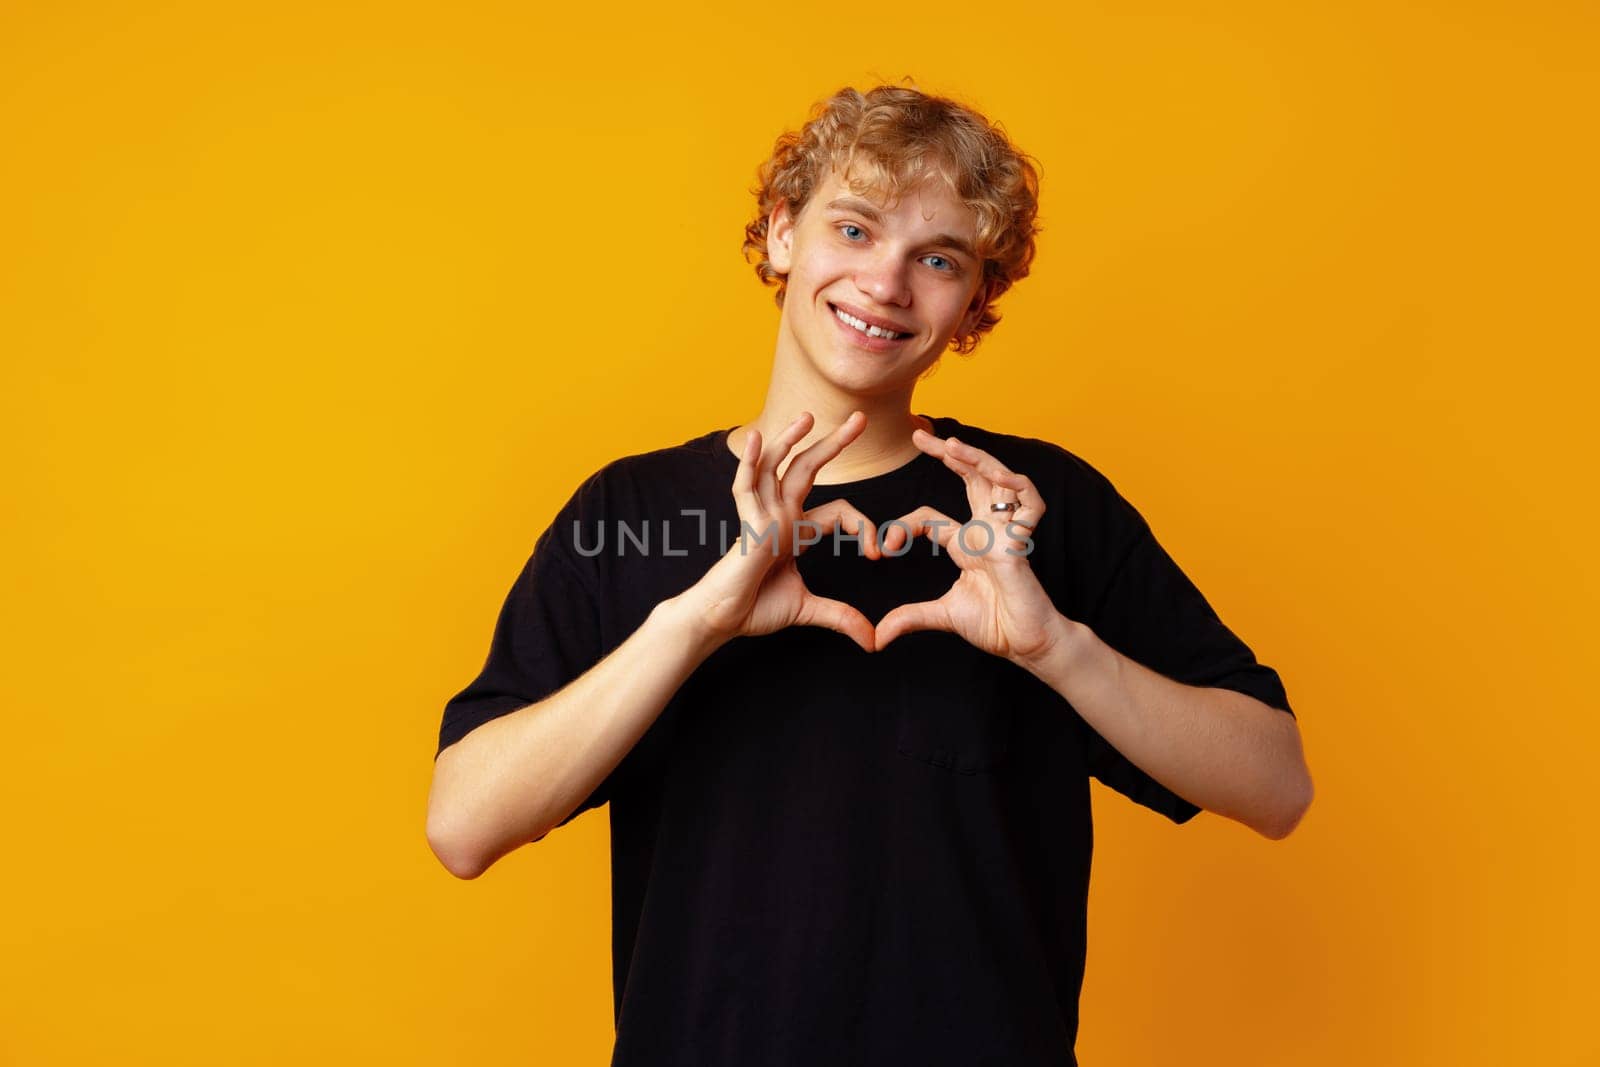 Young man on yellow background smiling and showing a heart shape with hands by Fabrikasimf